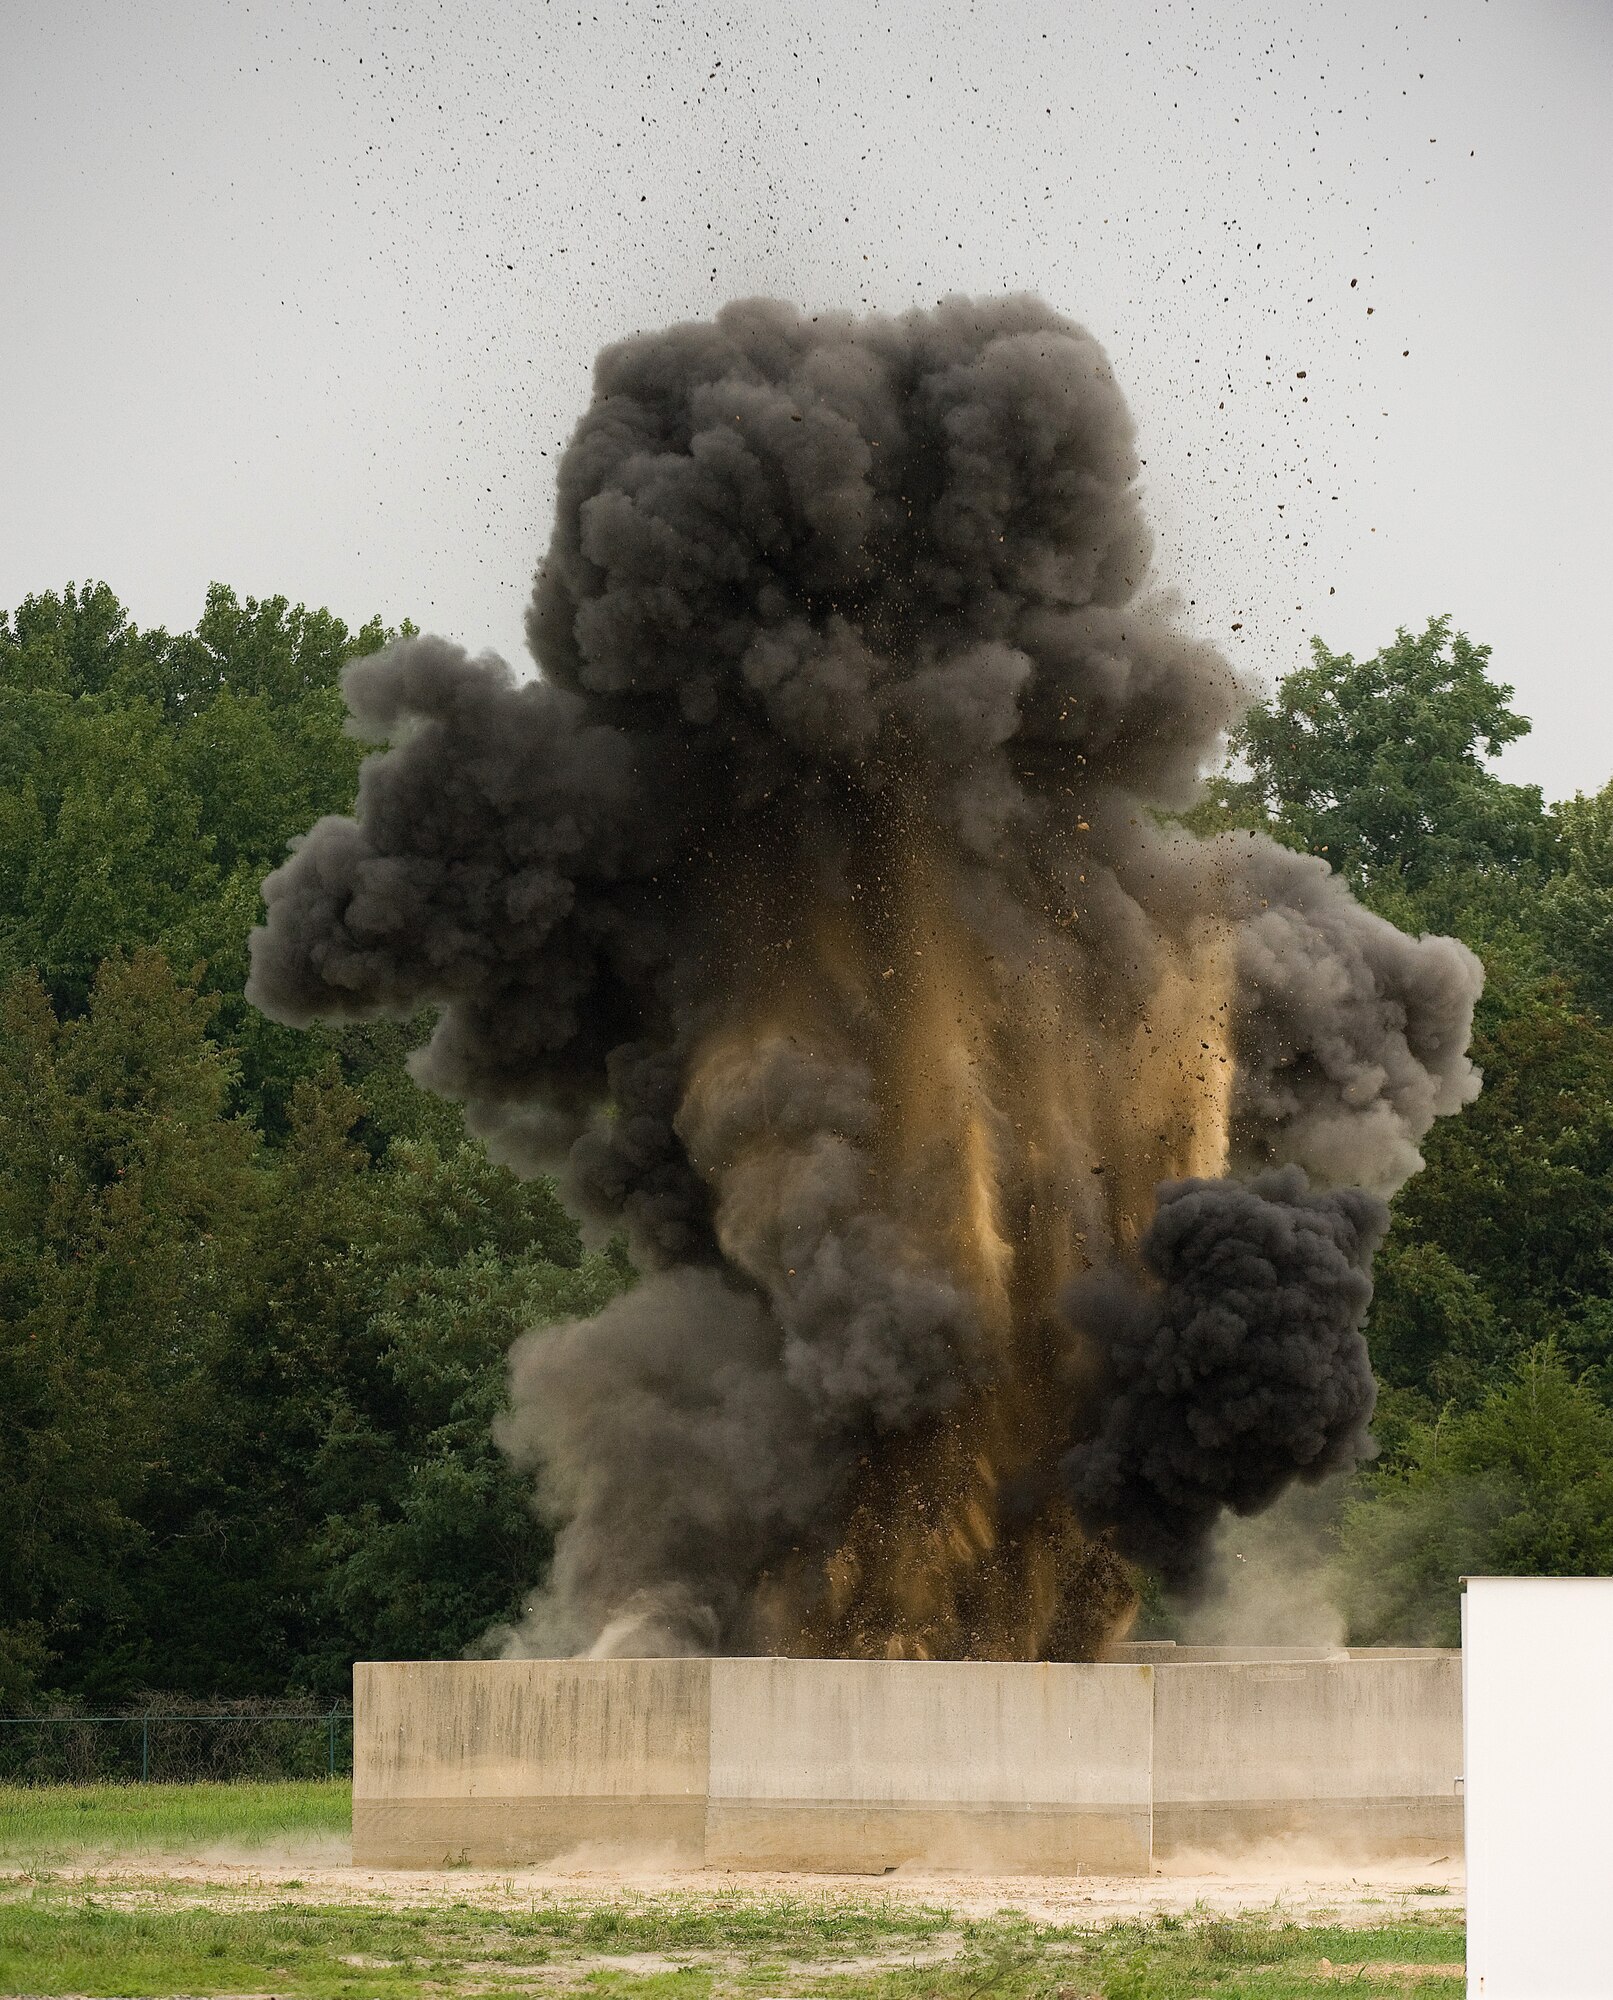 A piece of ordnance detonates at the Explosive Ordnance Disposal range at Dover Air Force Base, Del., July 29. EOD technicians from the 512th Civil Engineer Squadron here were testing various detonation theories as part of their core training. (U.S. Air Force photo/Jason Minto)